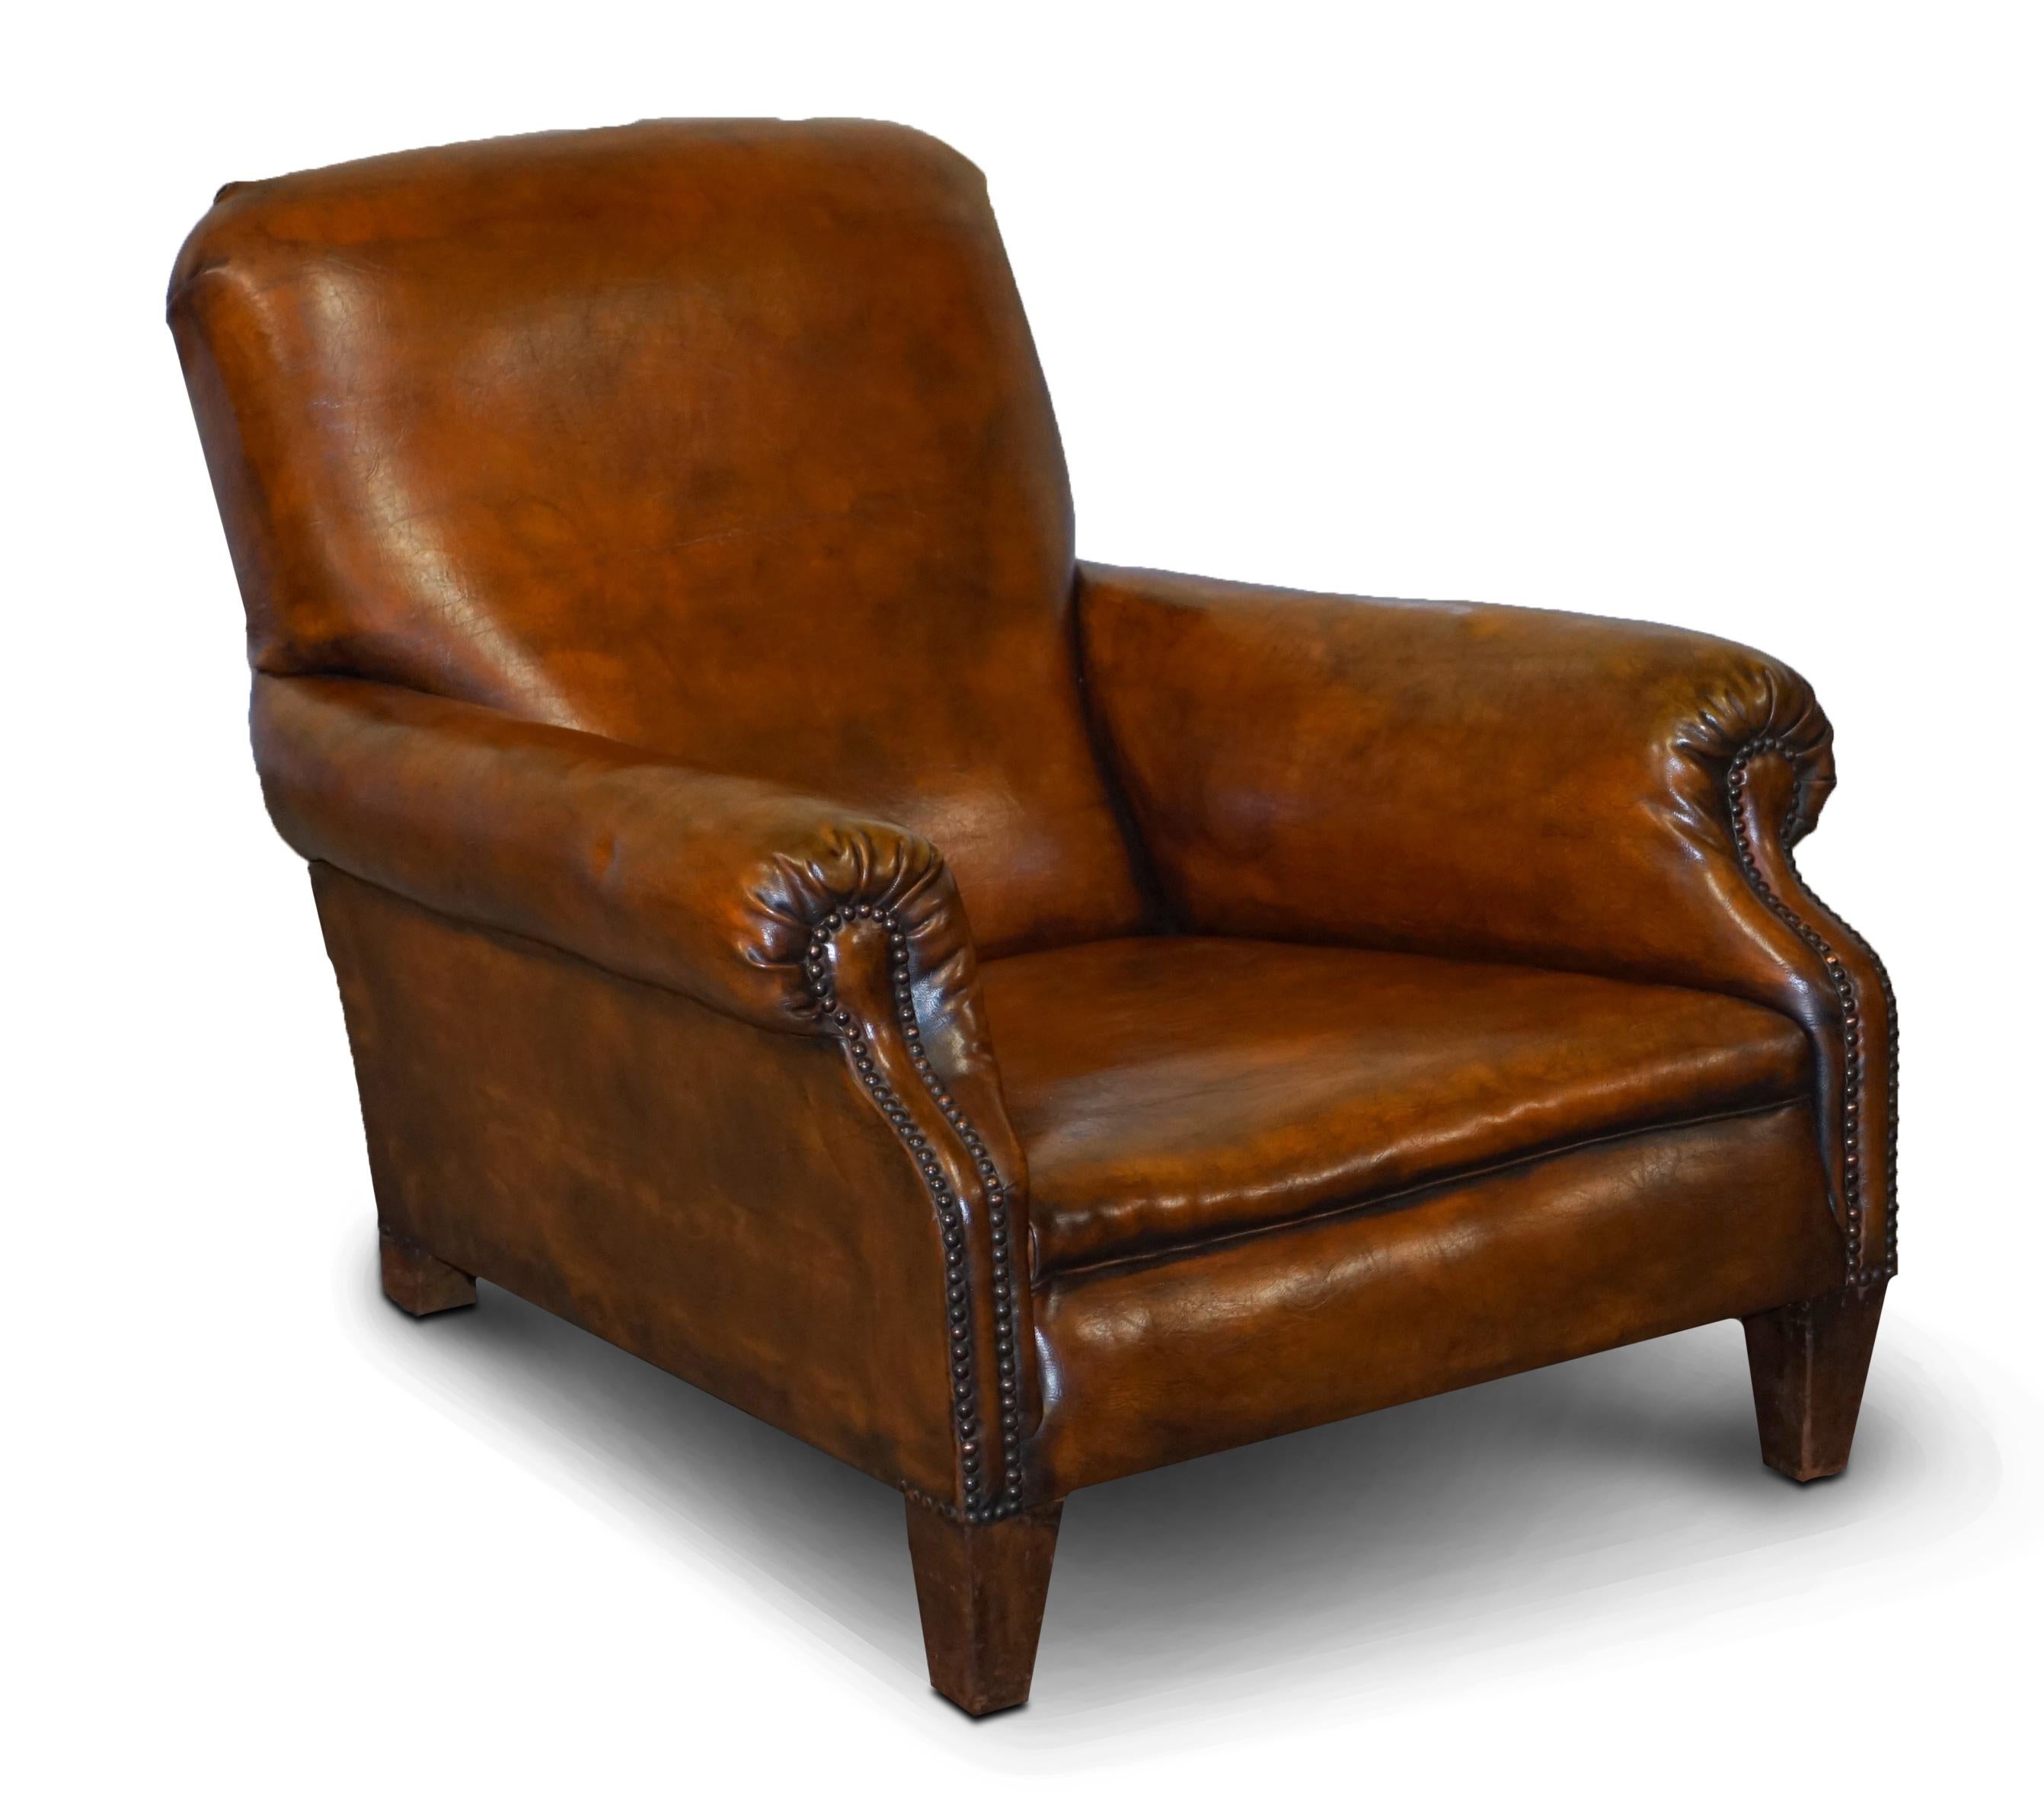 English Sublime Fully Restored Victorian Long Seat Platform Brown Leather Club Armchair